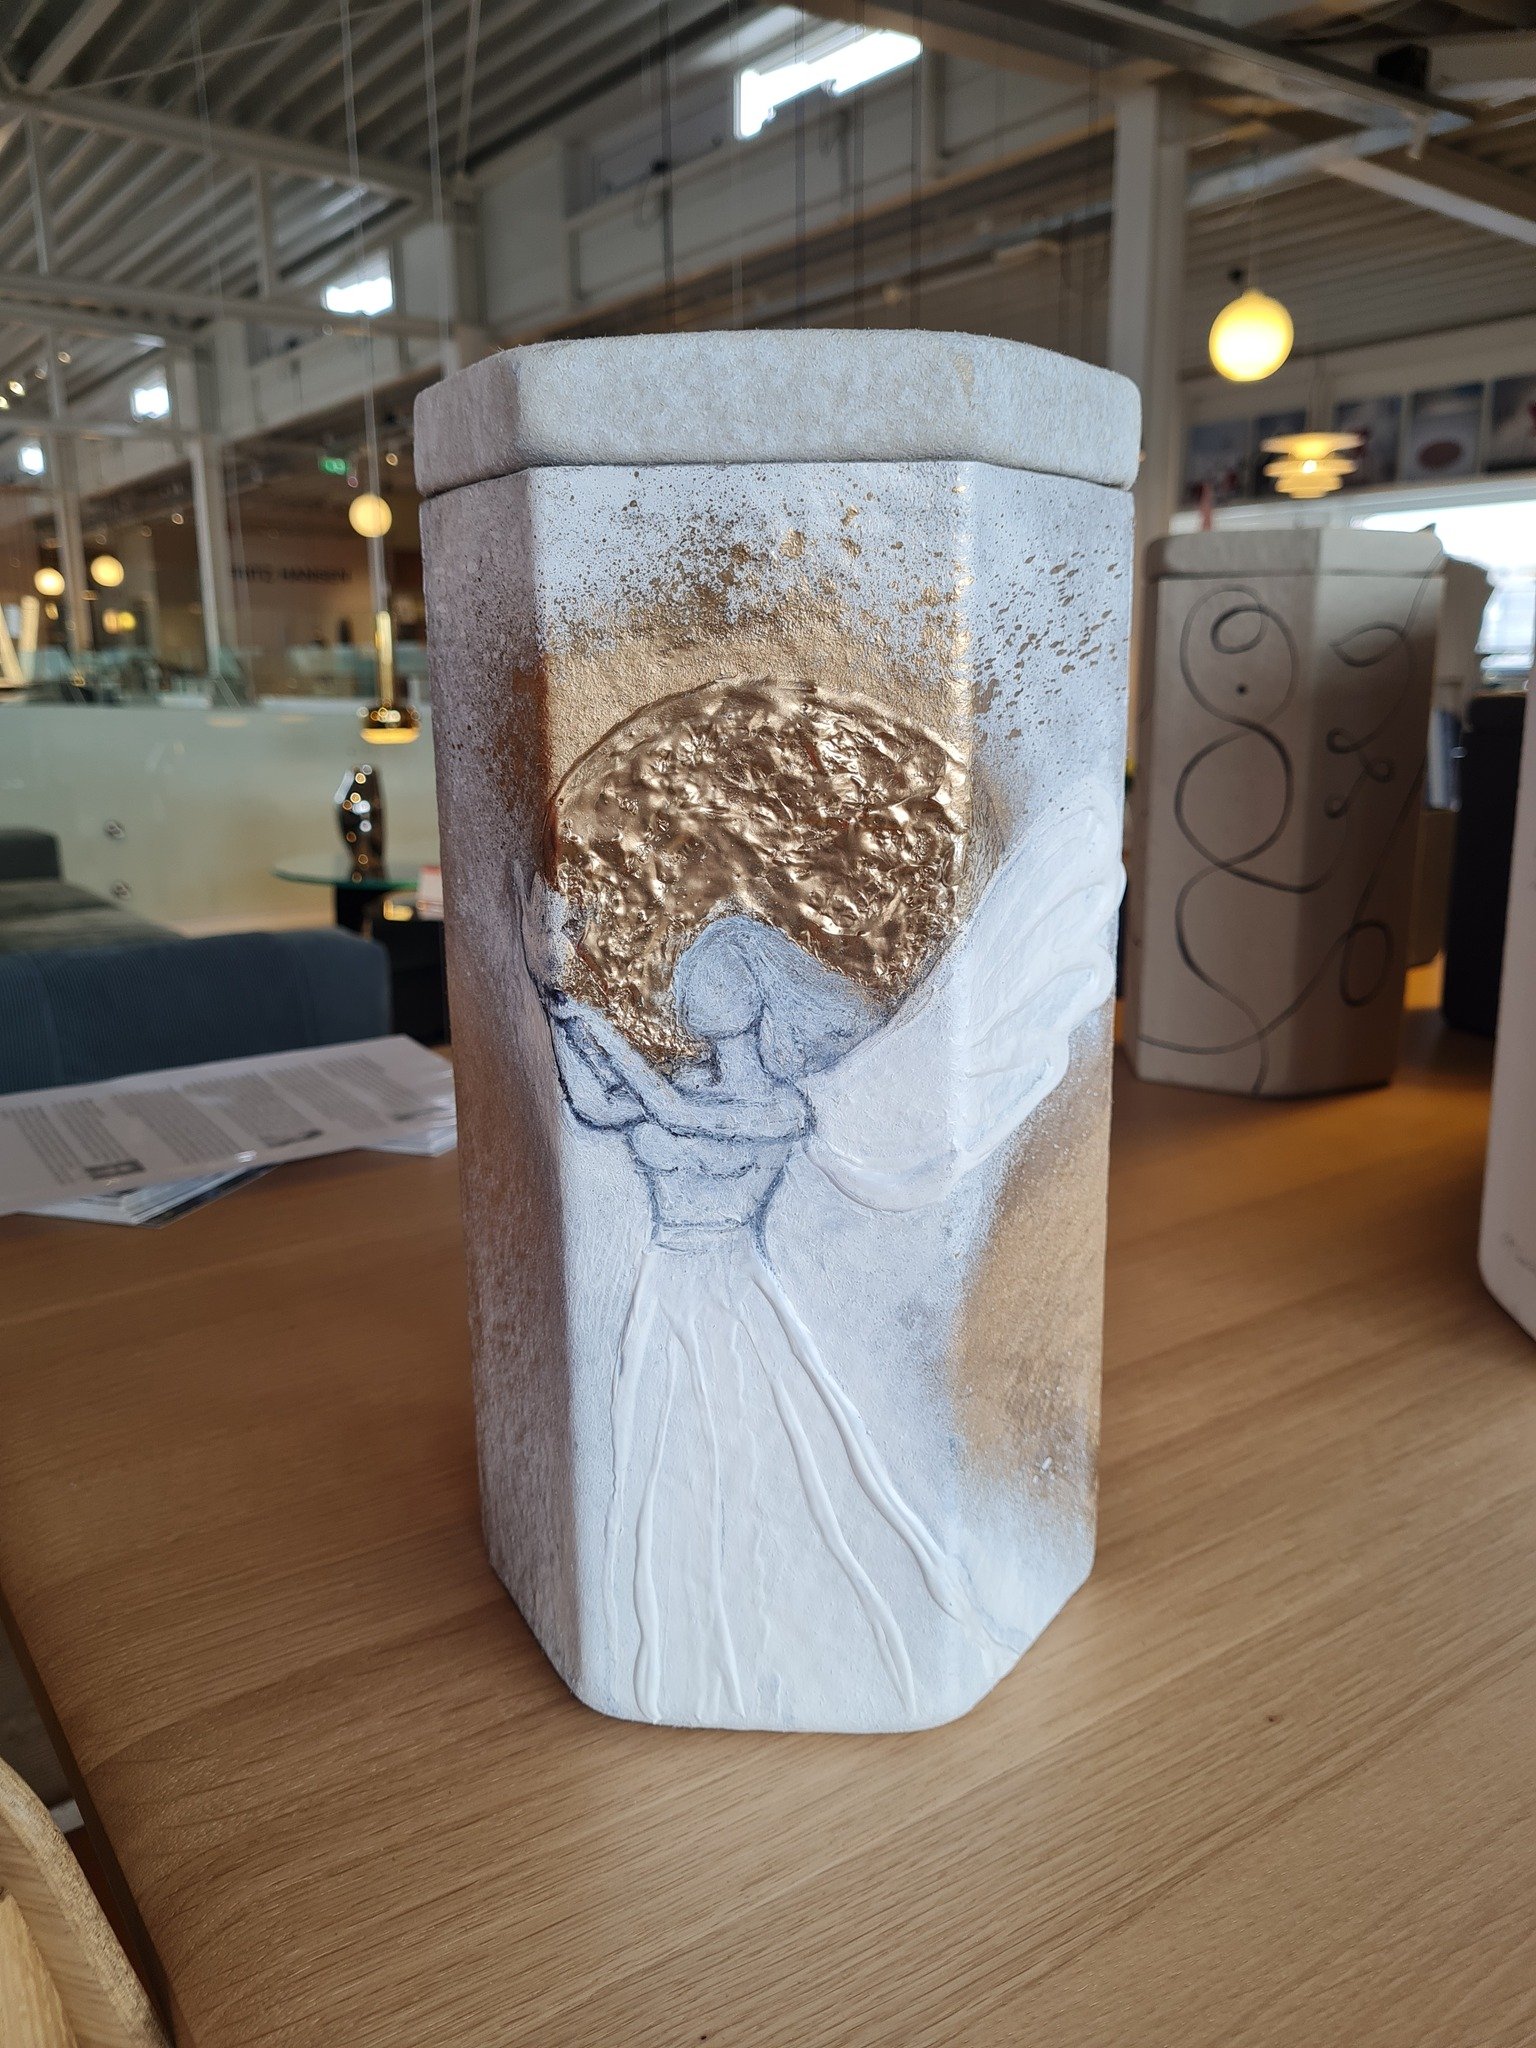 For this year's Design March we asked few ladies who have made a name in art to decorate an urn from us.
Ell&yacute; &Aacute;rmannsd&oacute;ttir is an artist and fortune teller who paints and draws based on her perceptions. These include angel images